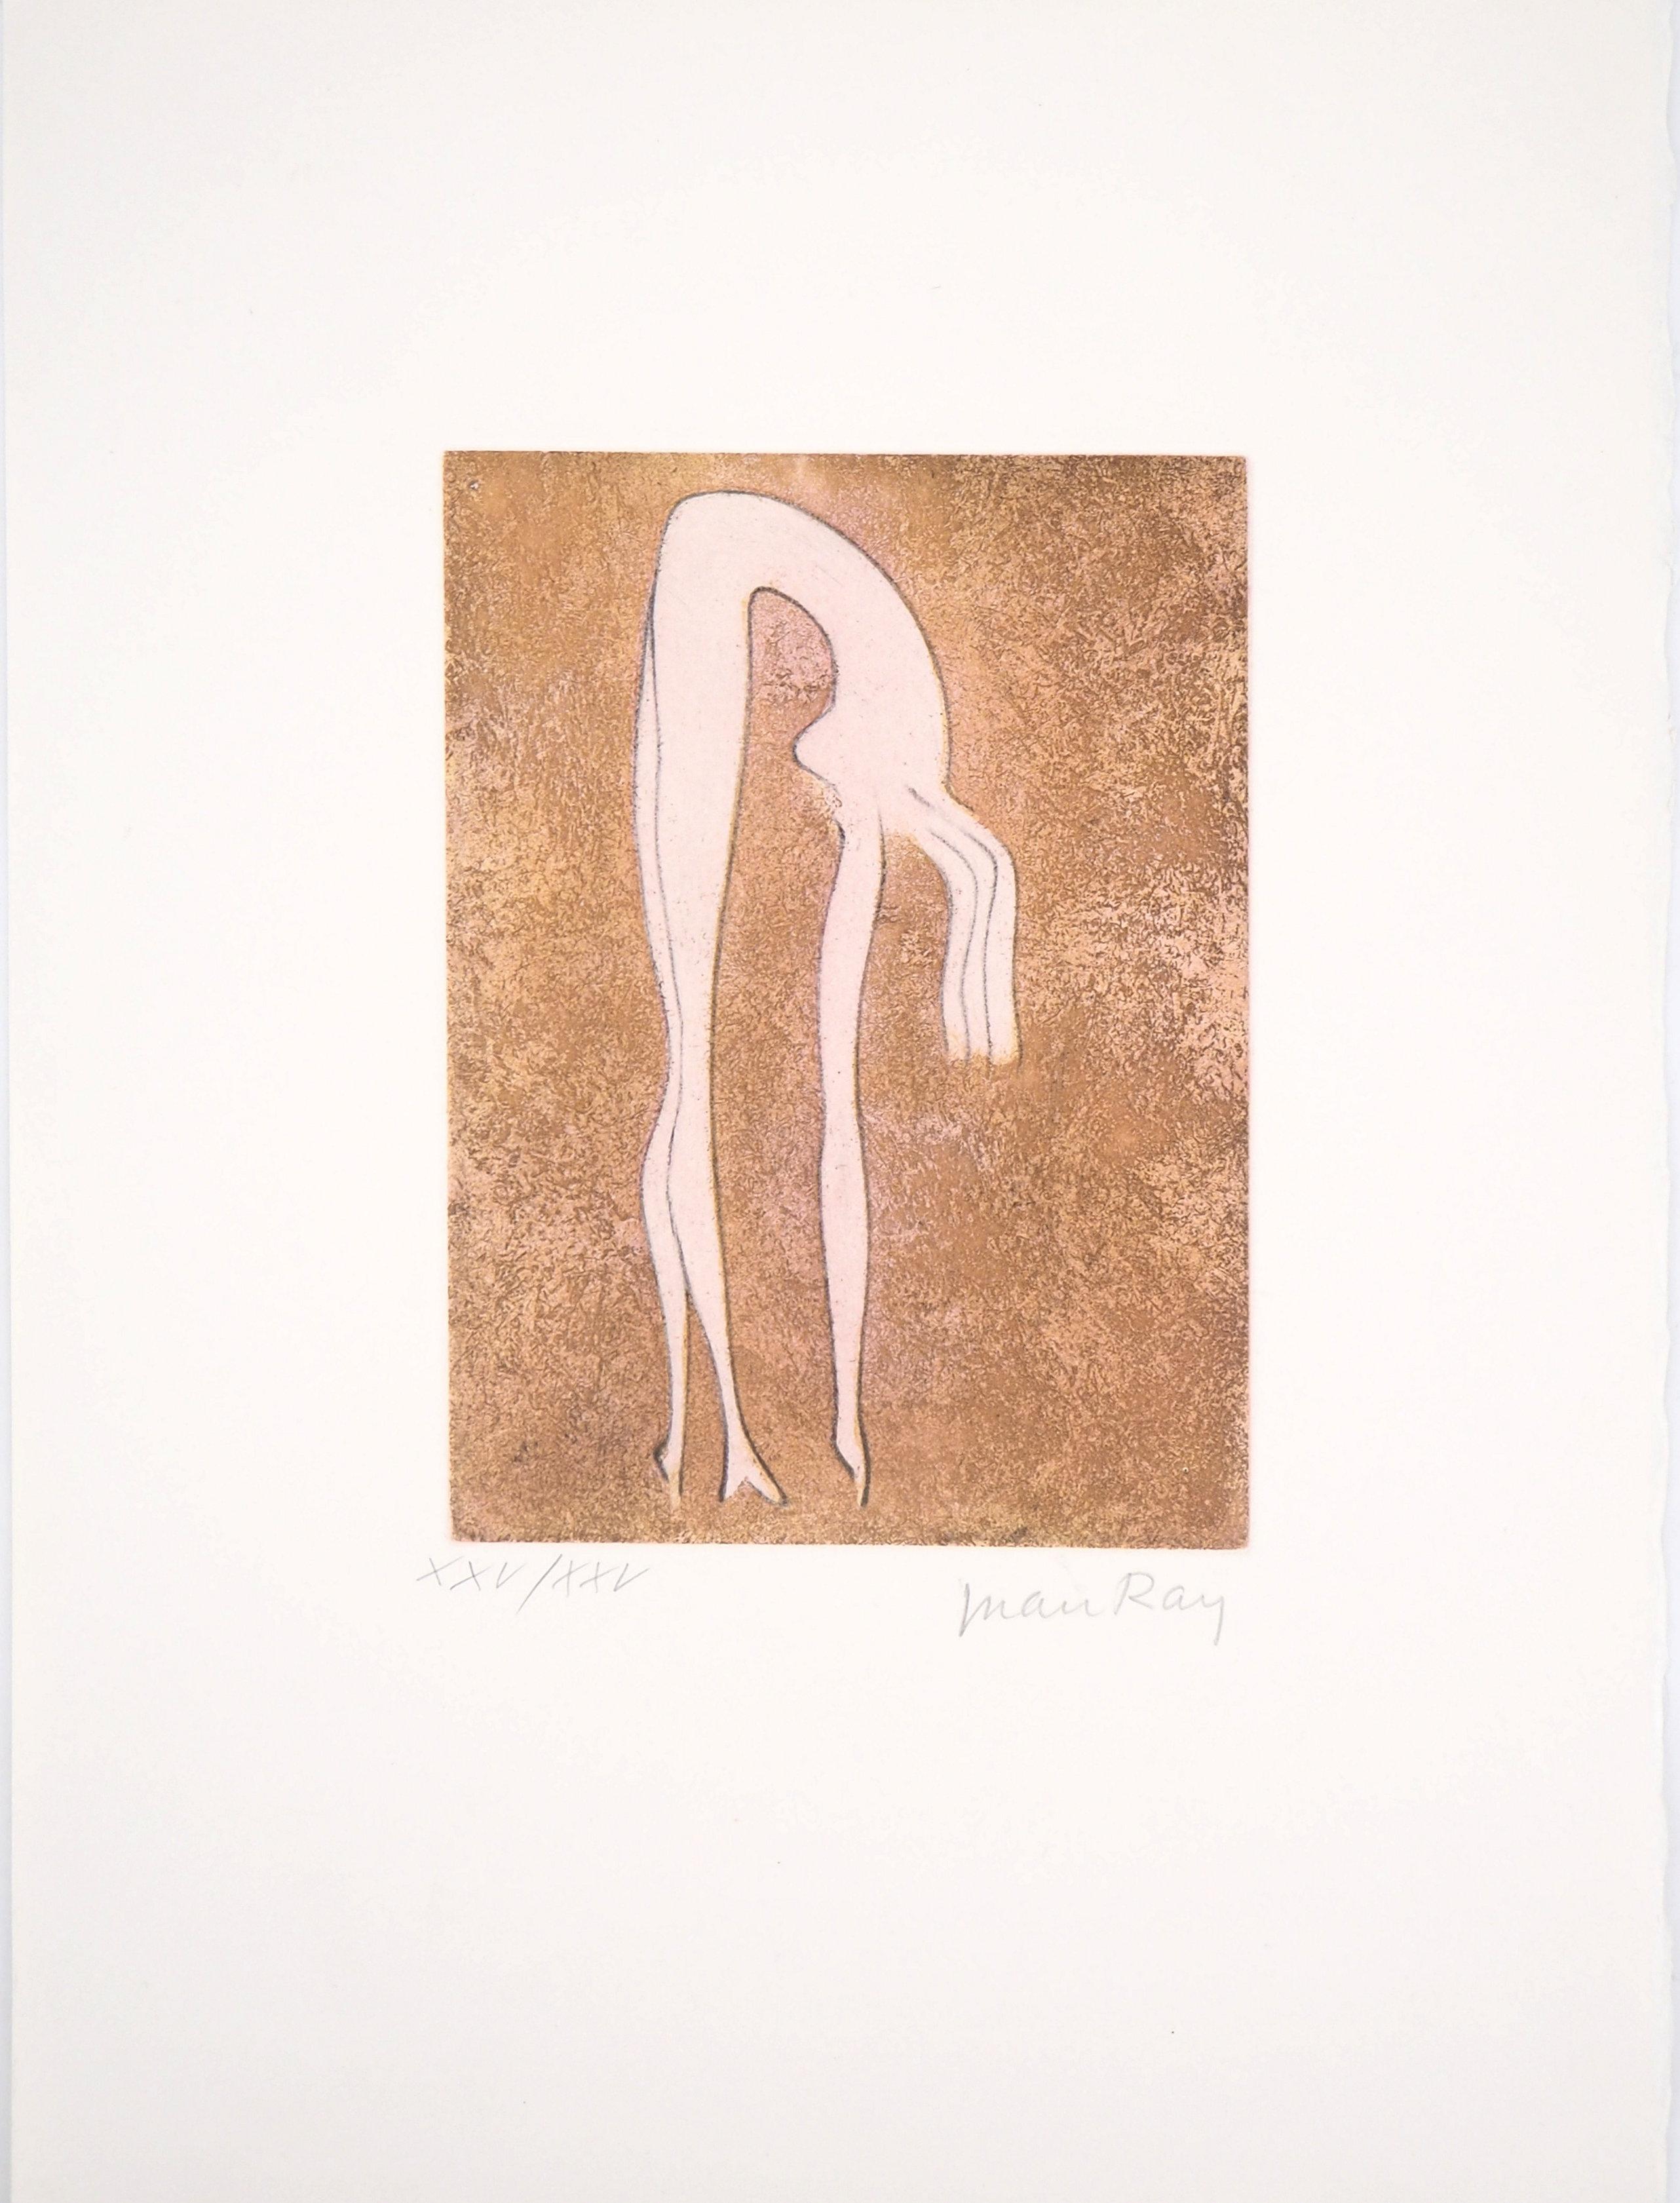 Man Ray Nude Print - Stretched Woman - Original handsigned etching 